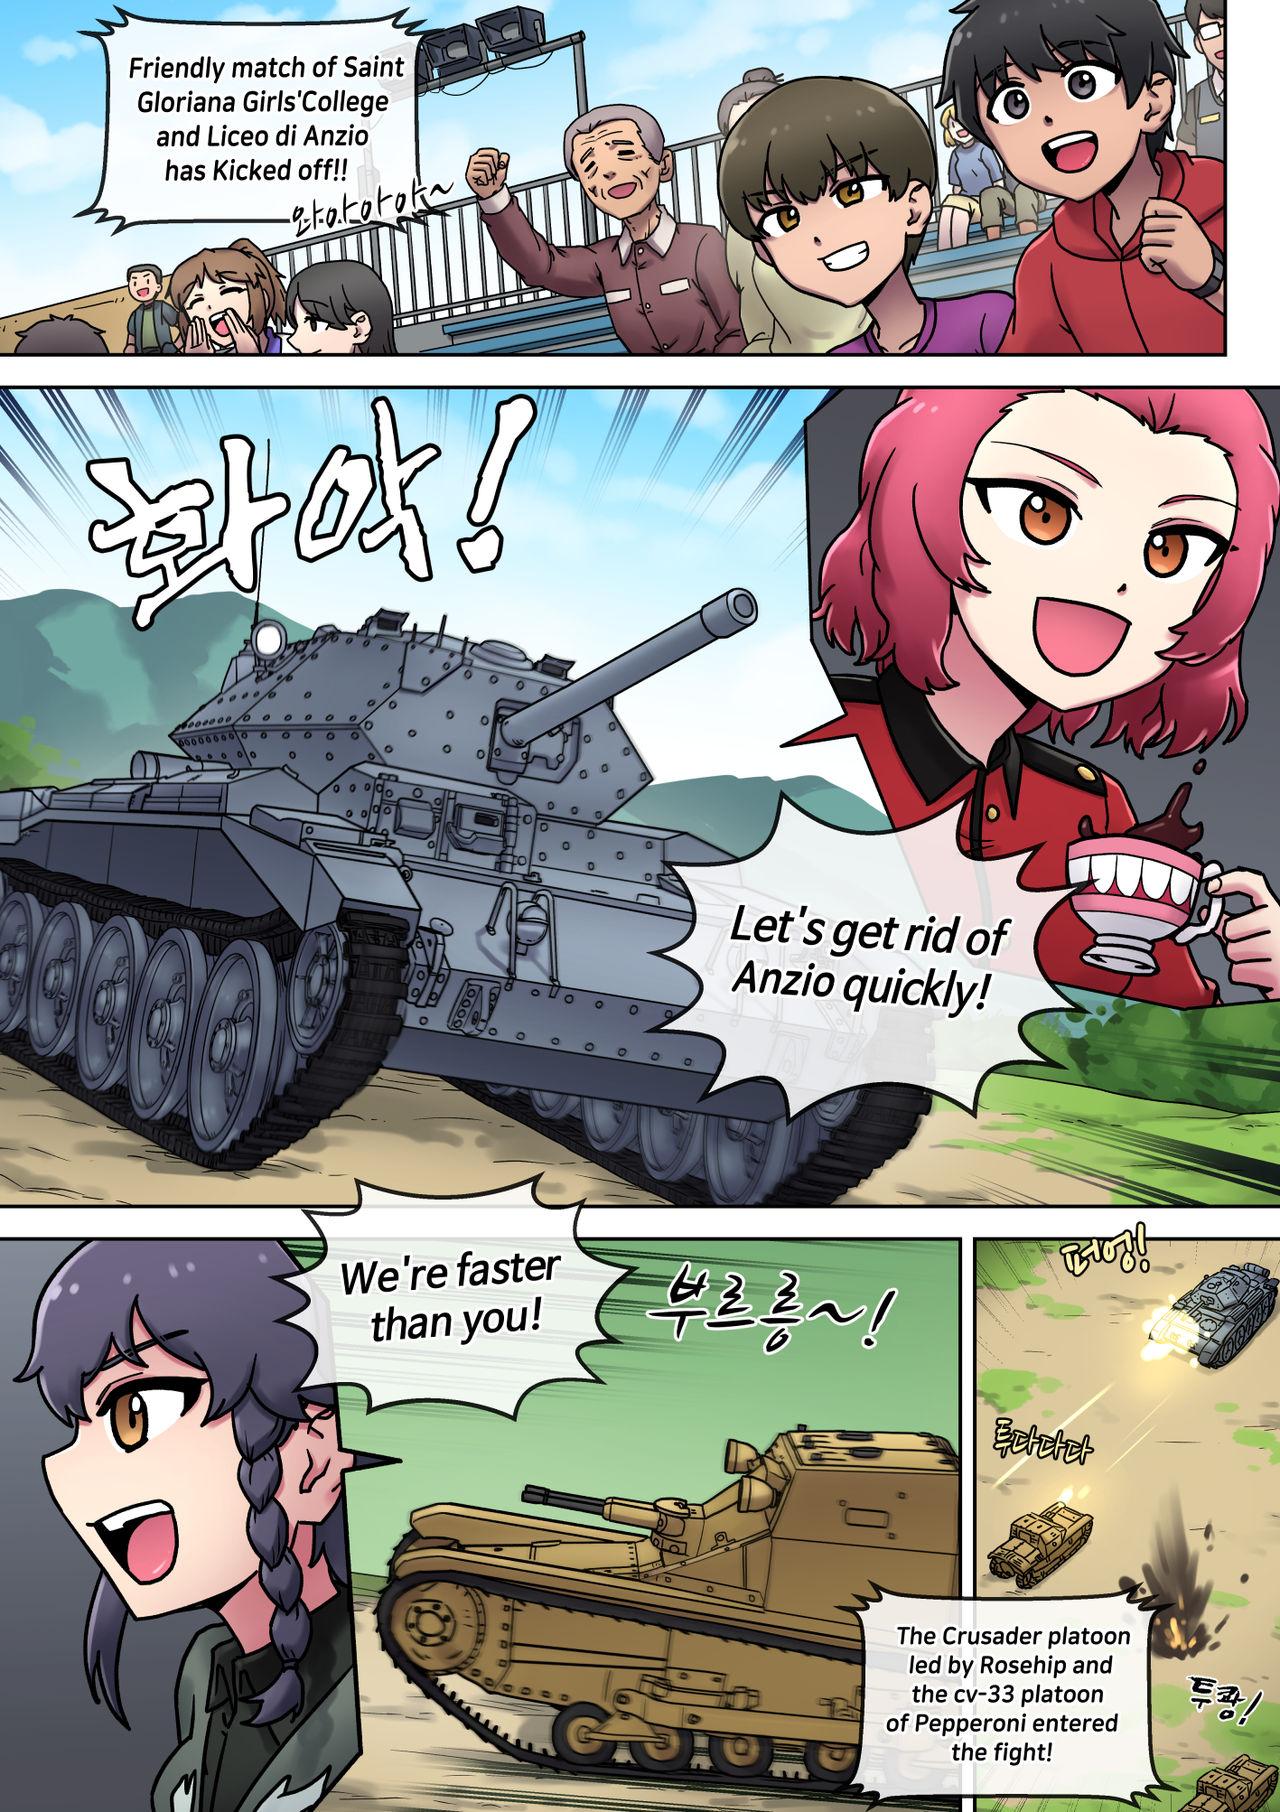 Sex Pussy Black? White? What's your choice? - Girls und panzer Cheating - Page 3